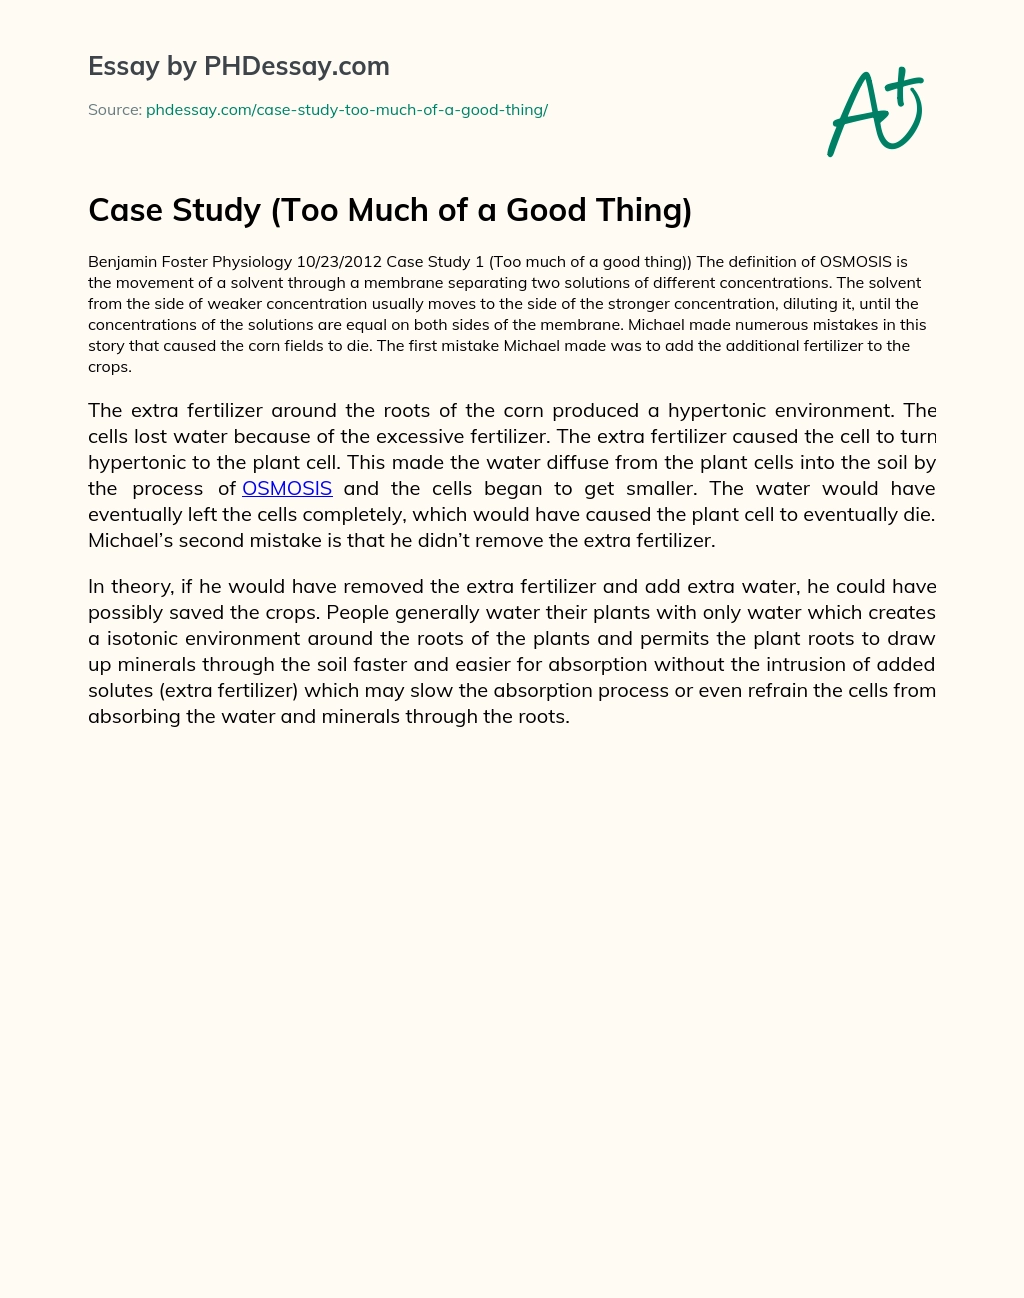 Case Study (Too Much of a Good Thing) essay